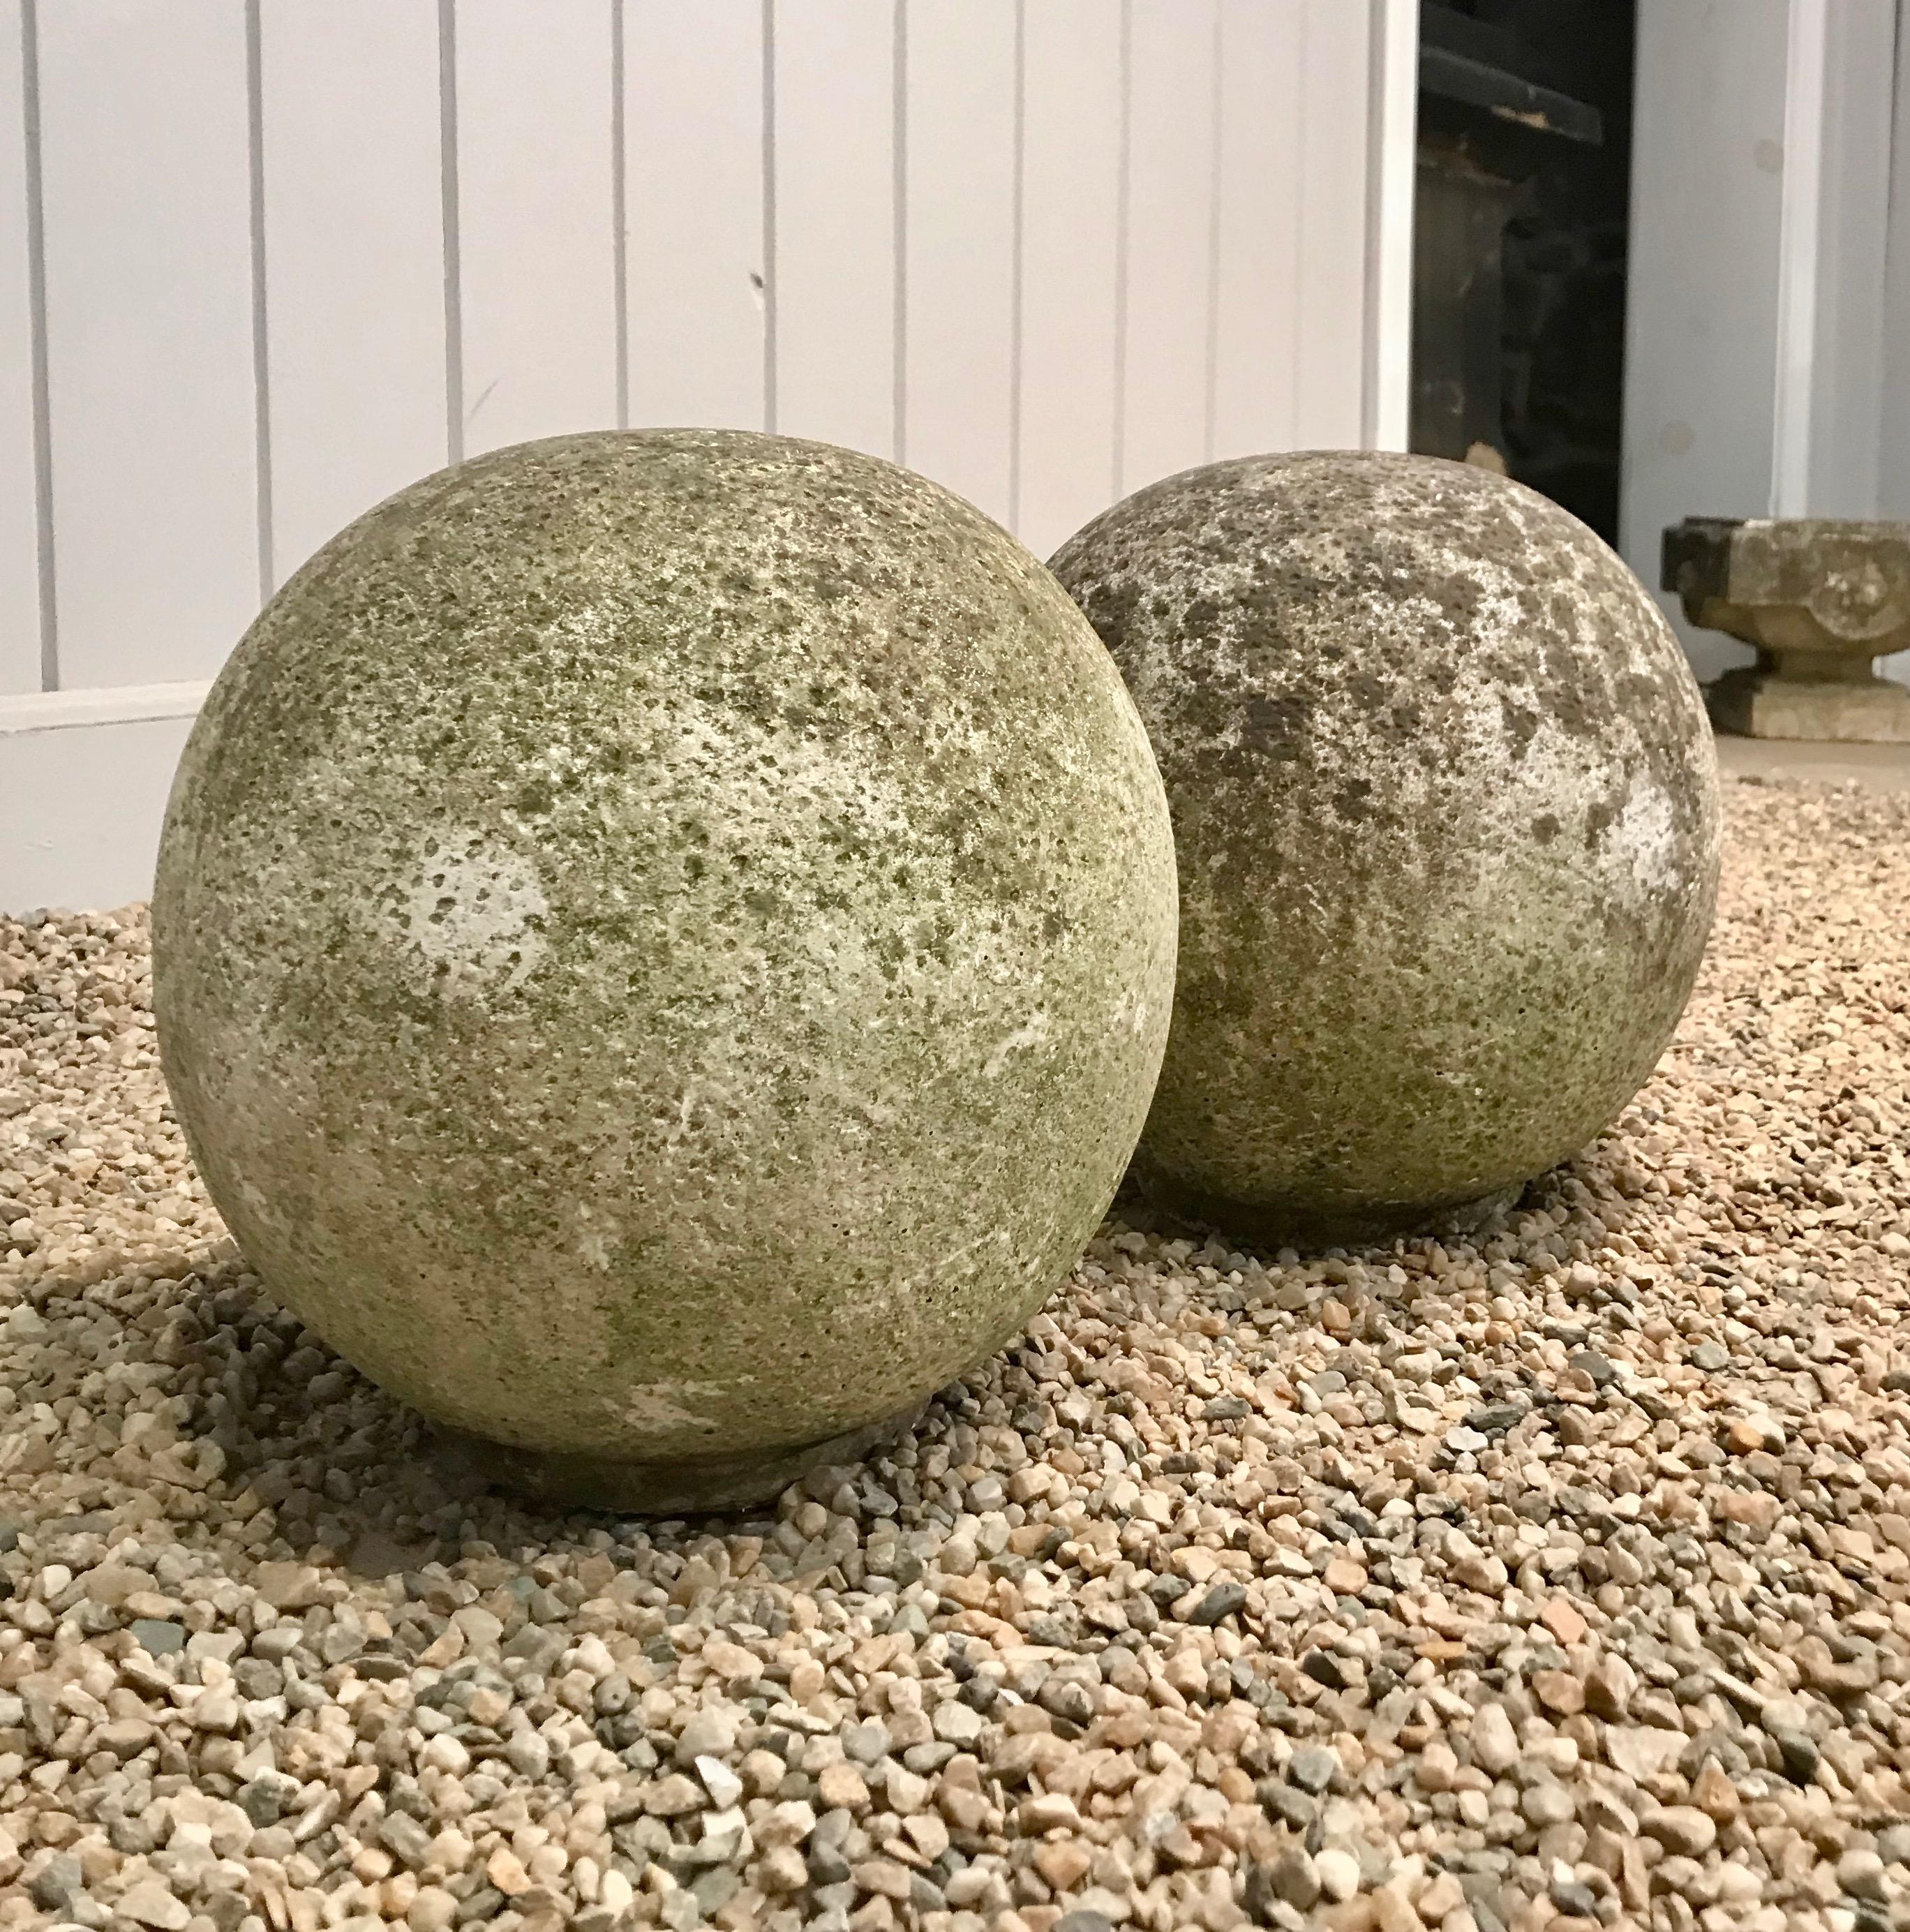 We love these cast stone balls for their stunning weathered surface with moss that will green up if placed in a damp and shady location. In very good vintage condition, with flat bottoms to prevent rolling, they would be wonderful flanking the